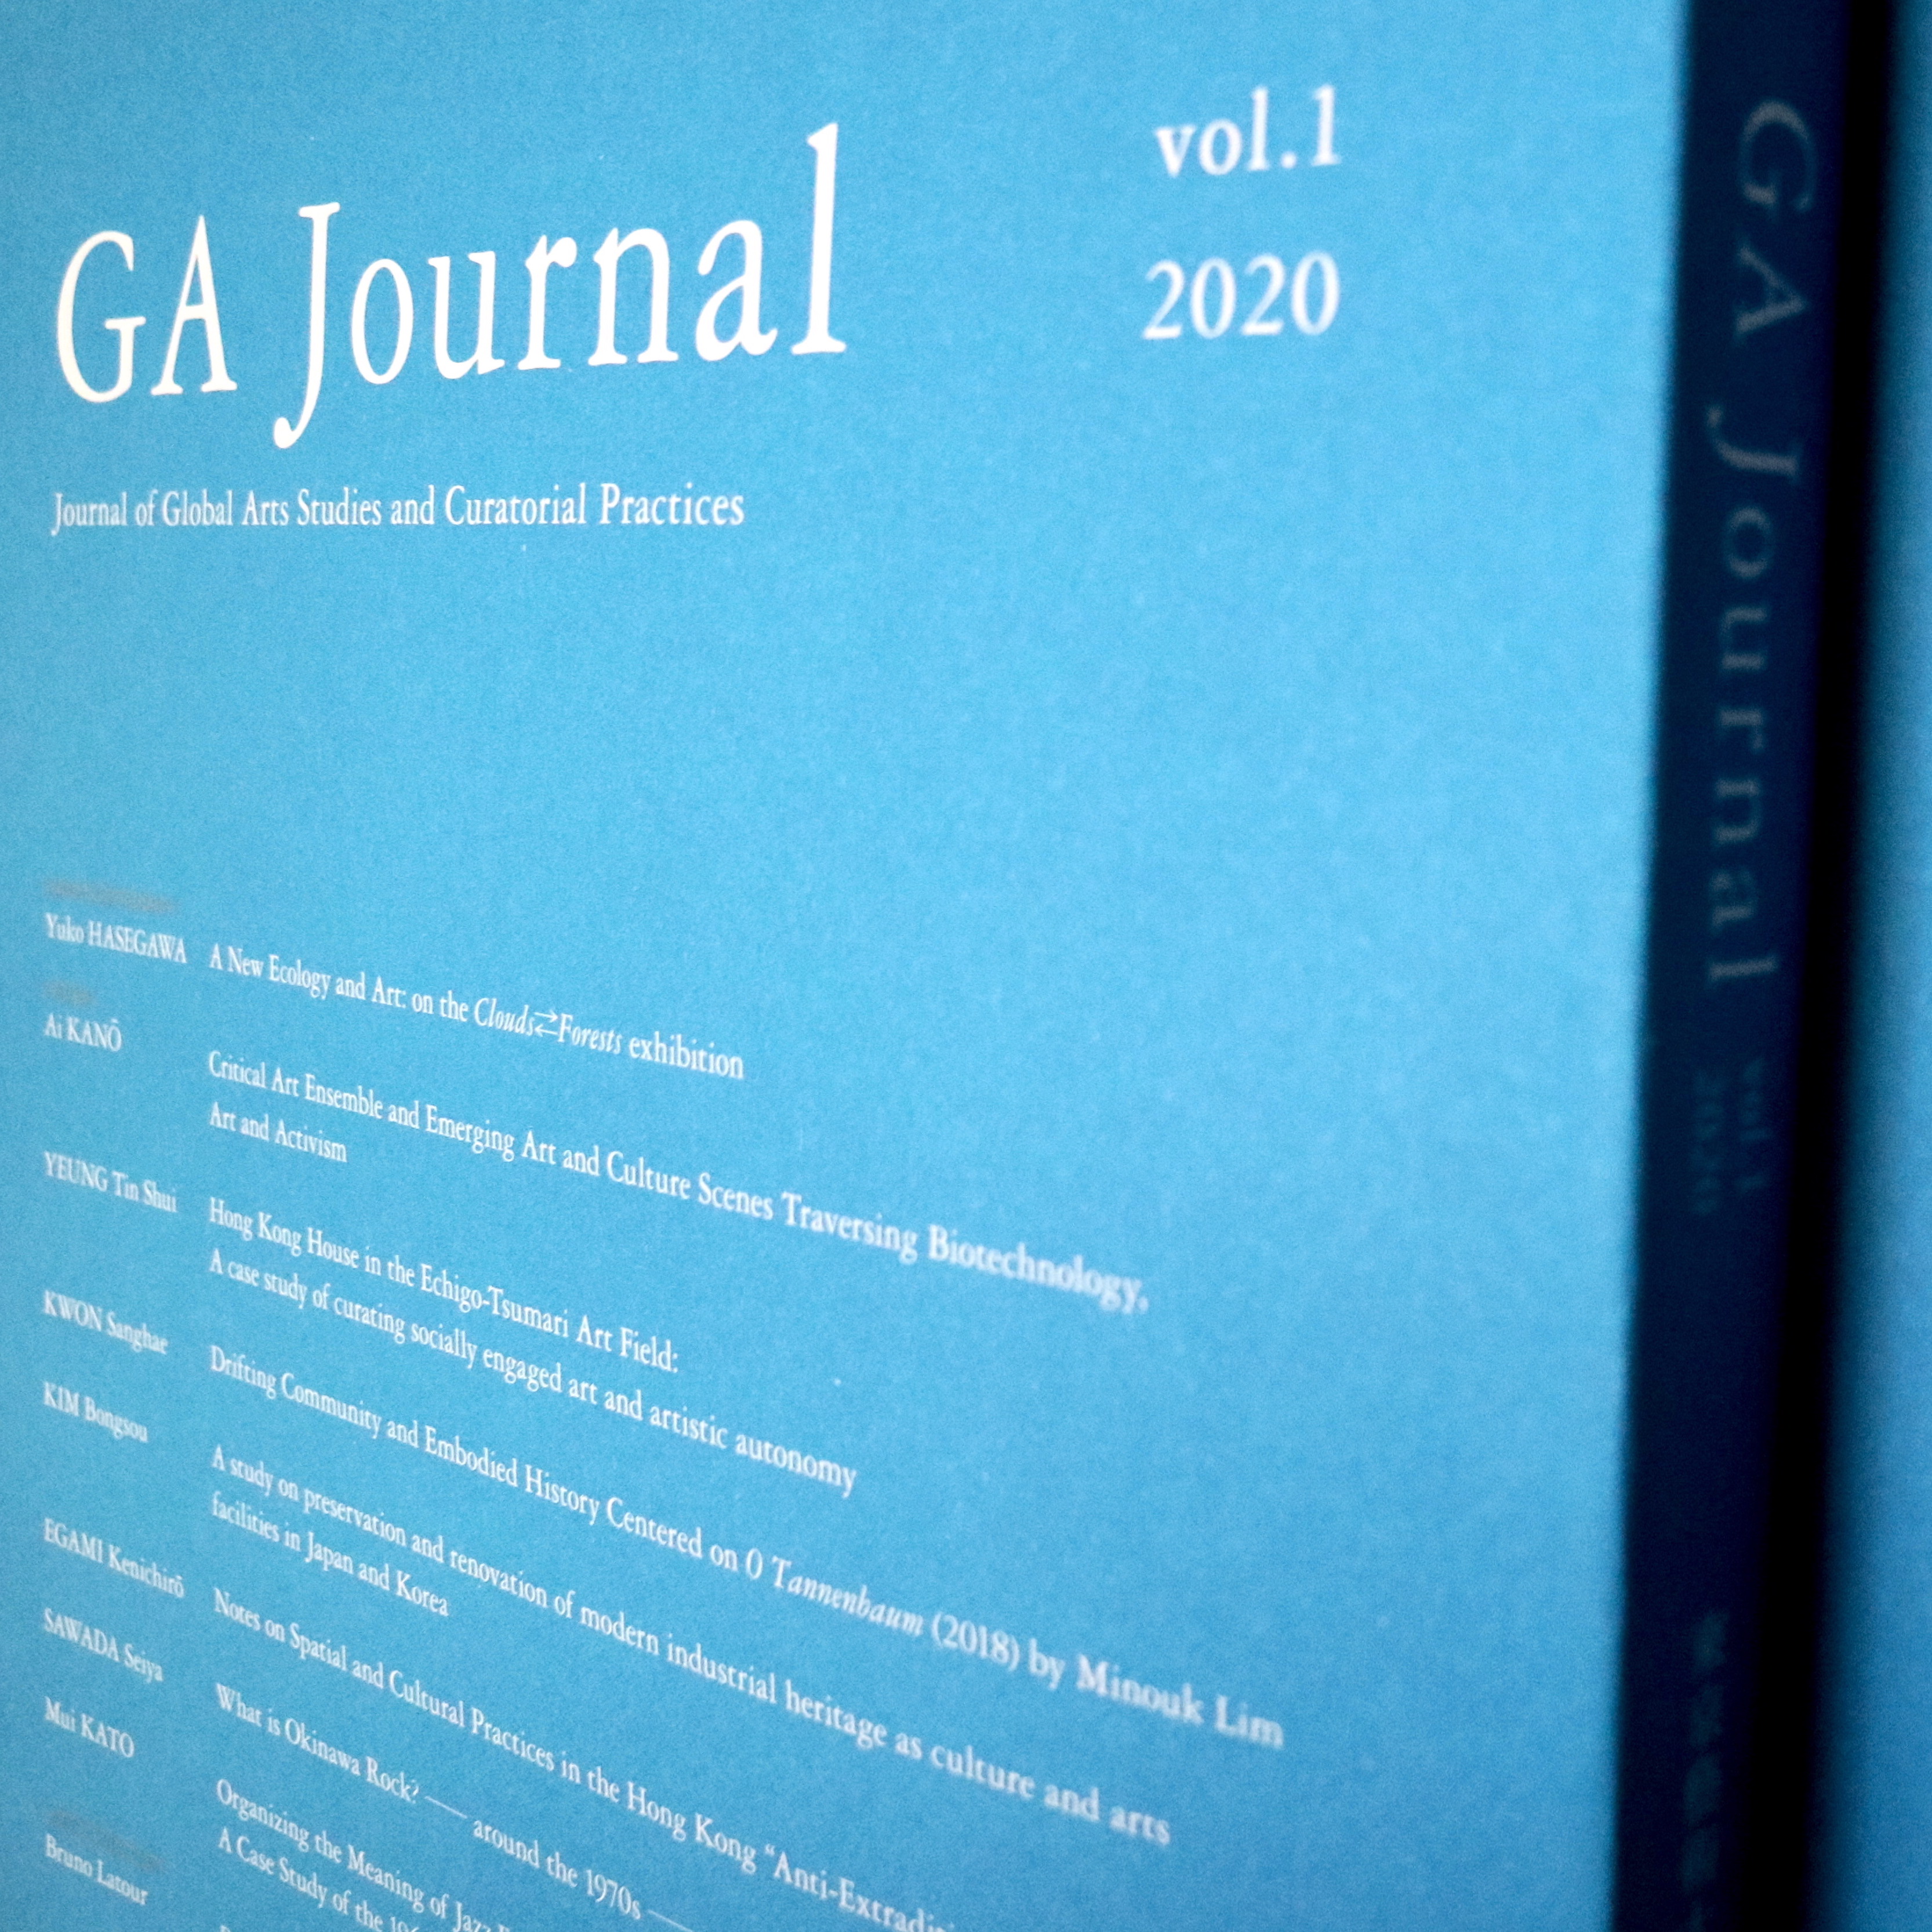 New Publication: “Journal Of Global Arts Studies And Curatorial Practices” Vol.1